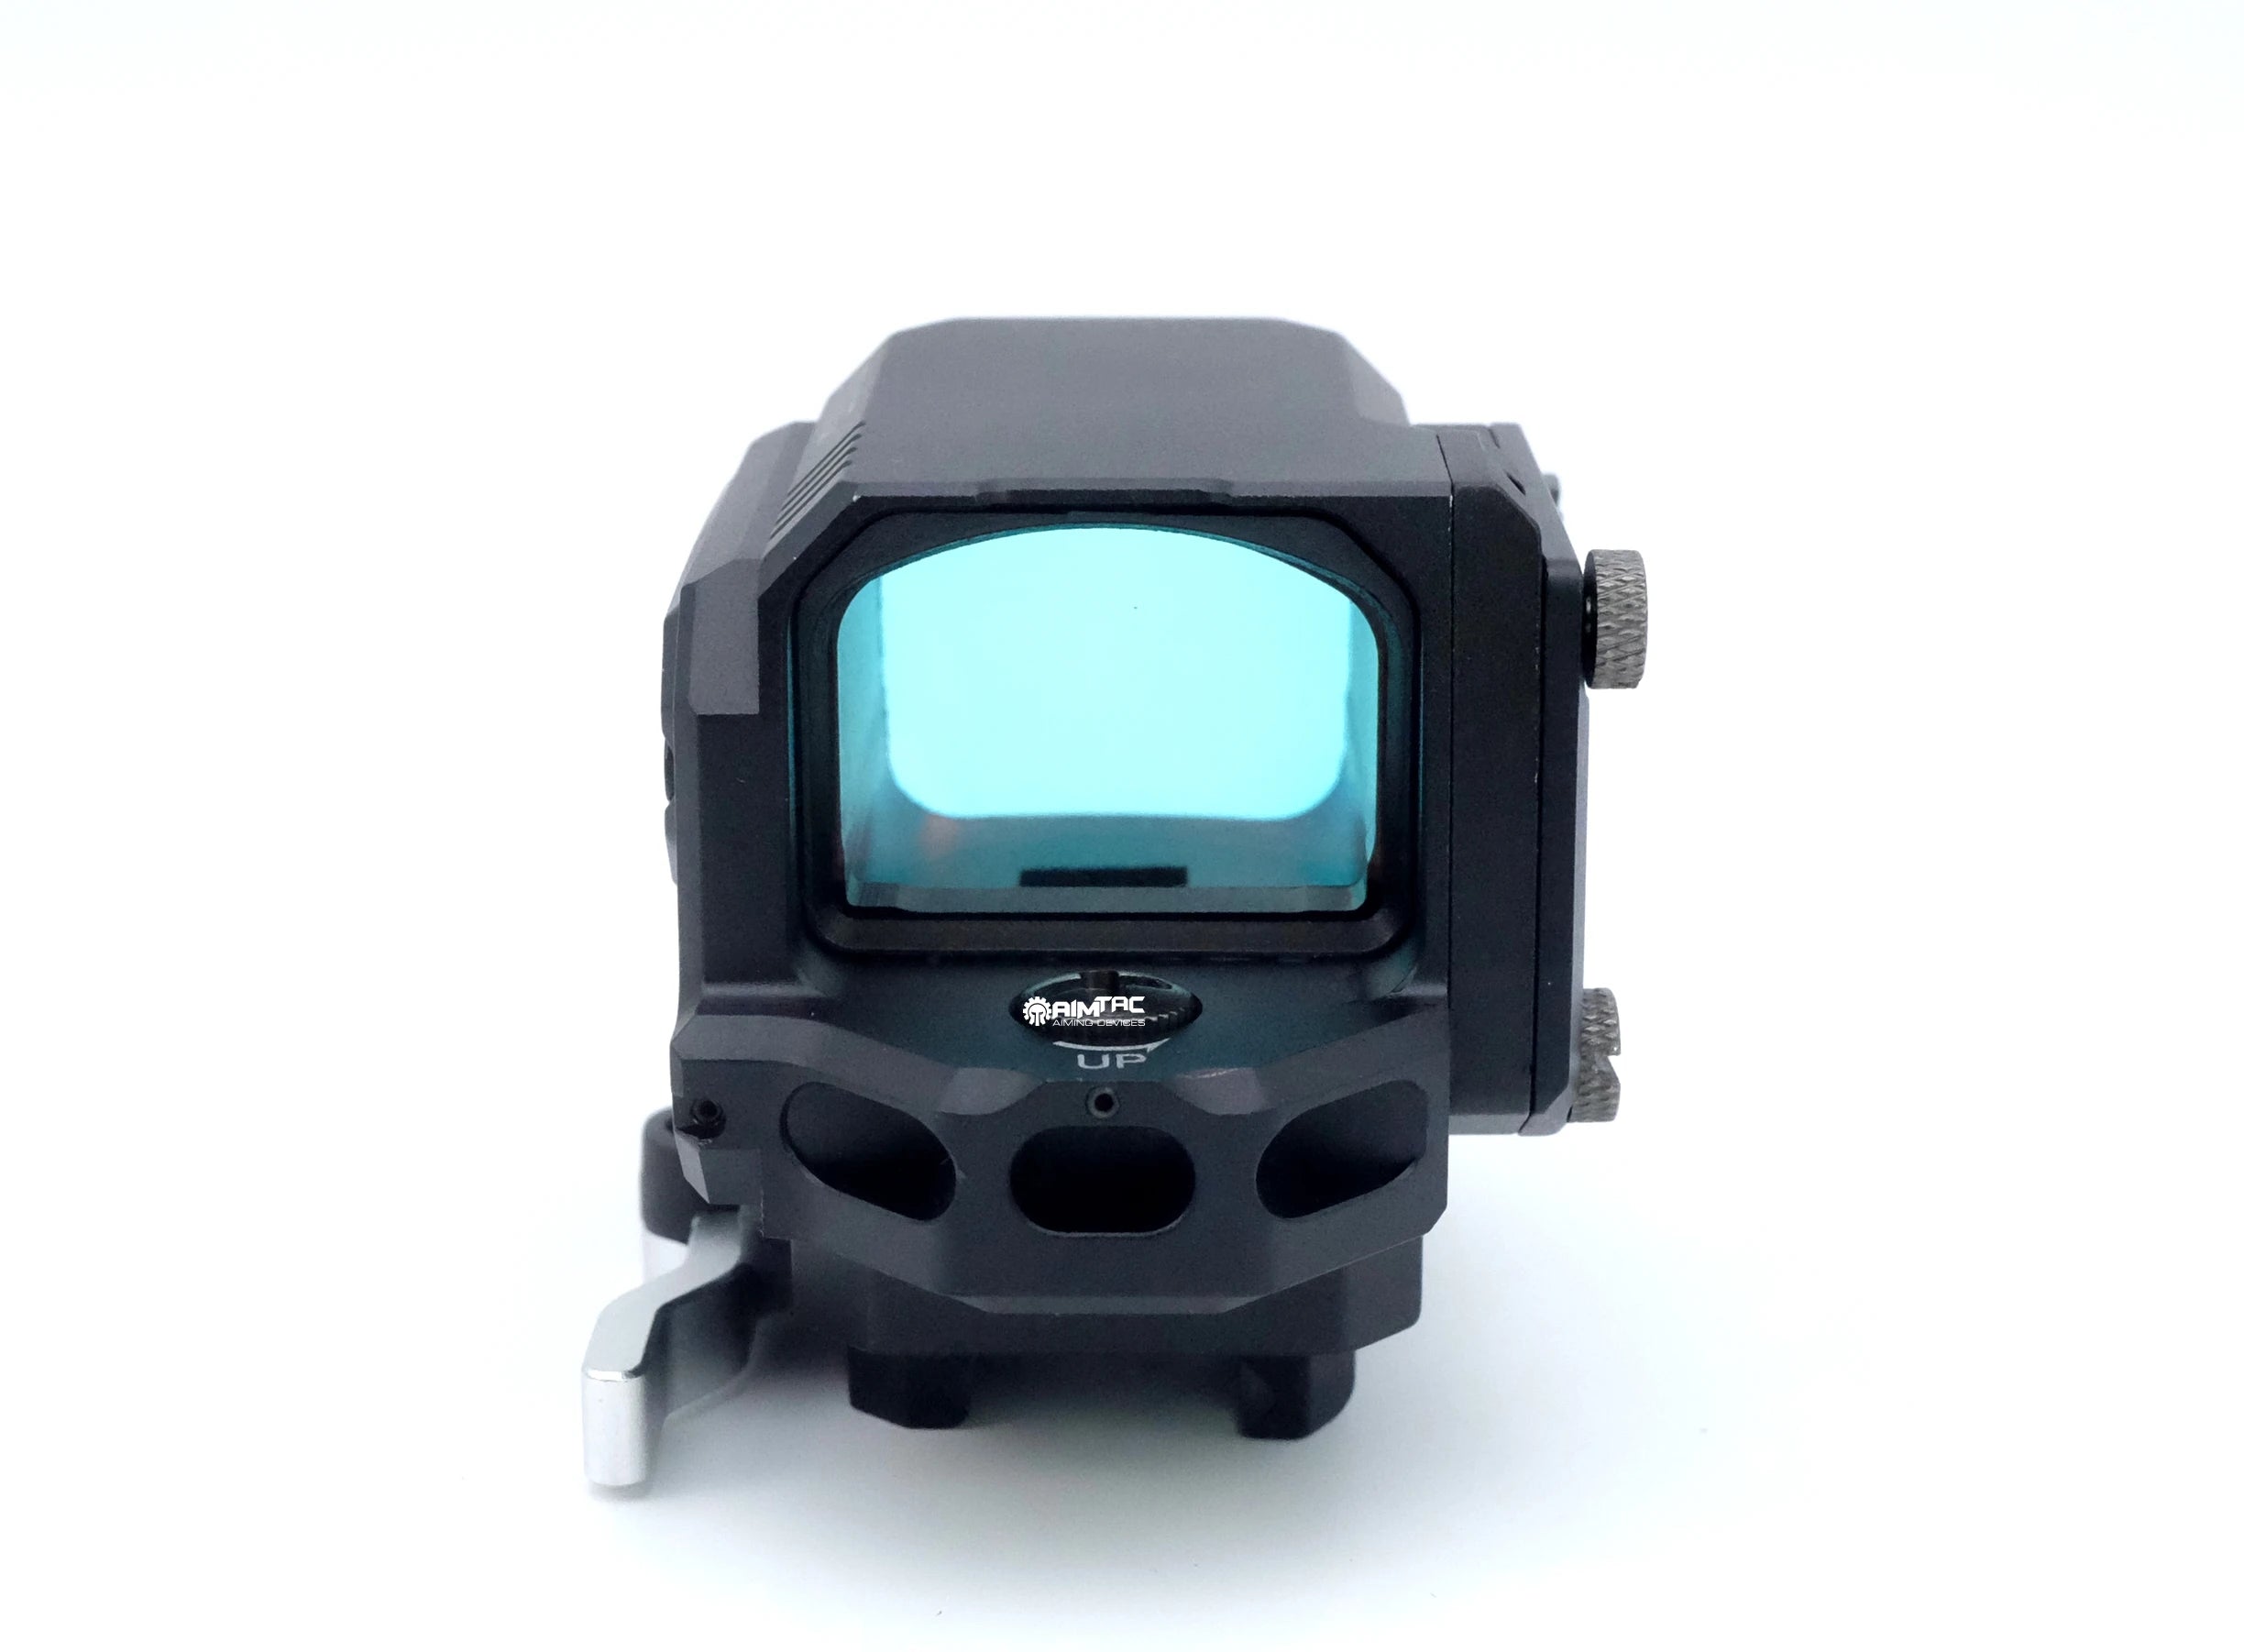 Rone1x Red Dot Sights Reflex Sight Airsoft with Full Markings